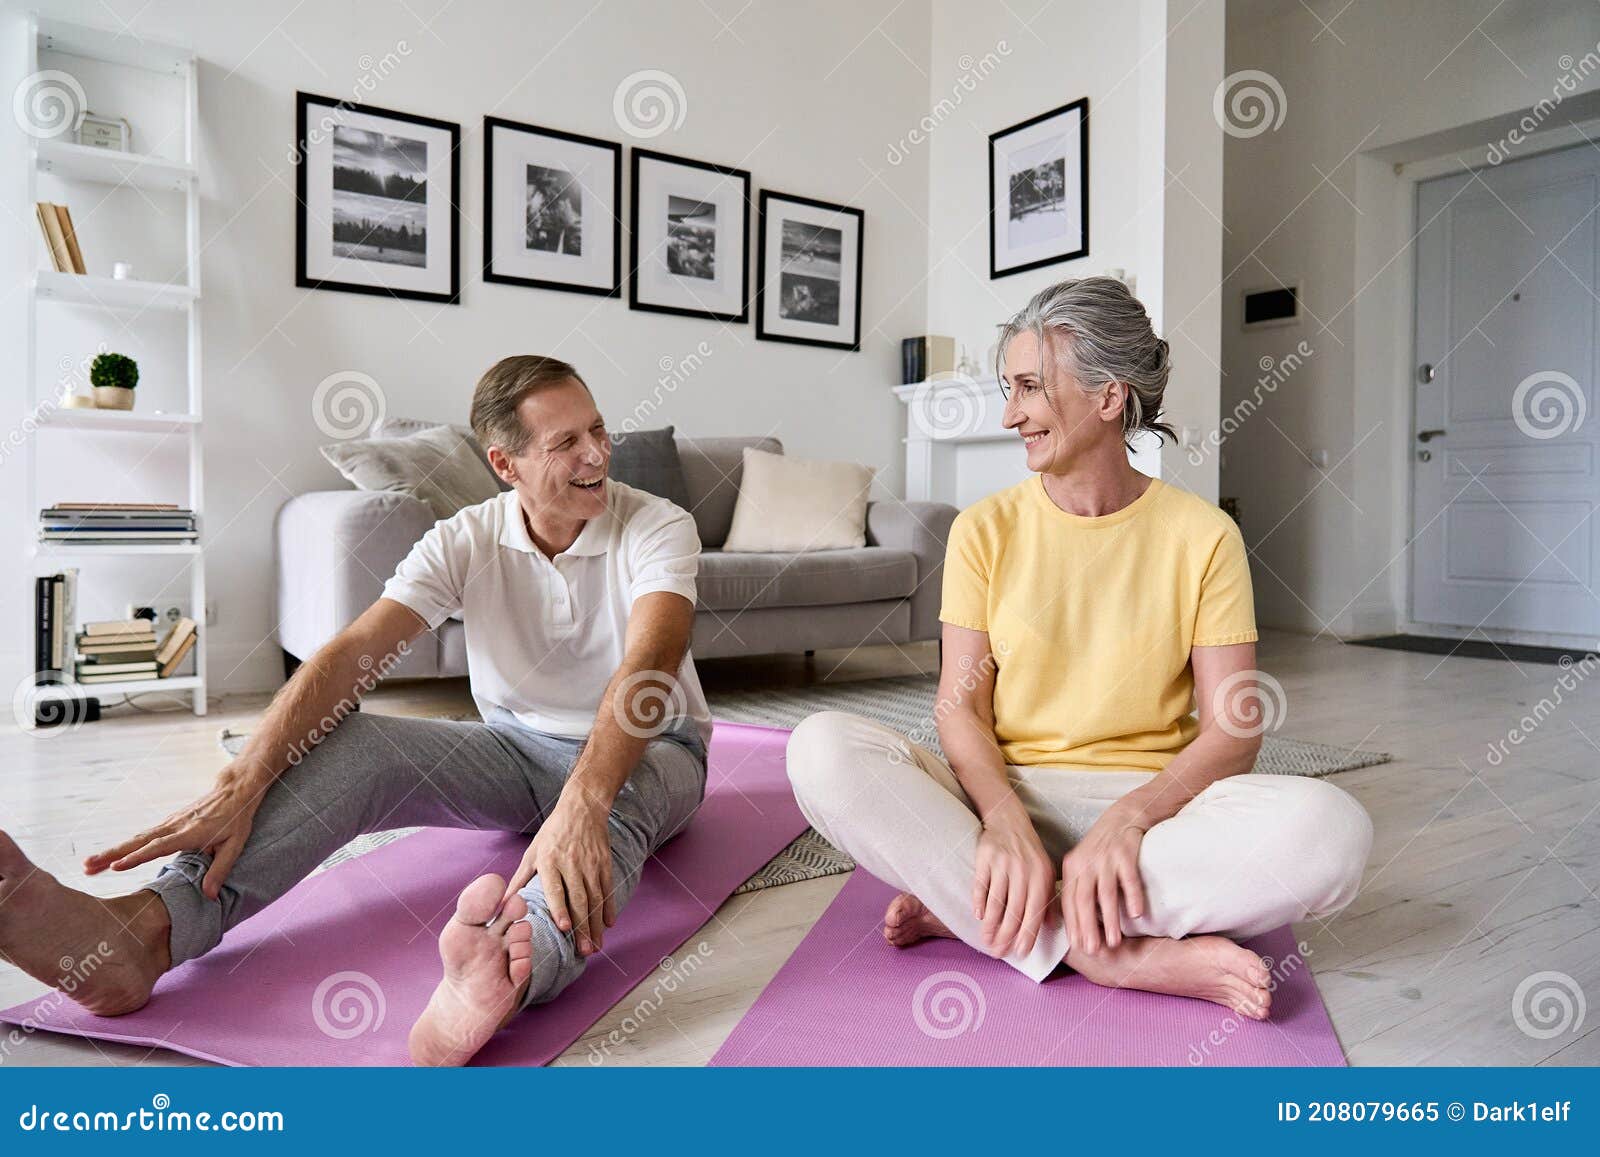 fit active mature wife and senior husband having fun exercising at home.